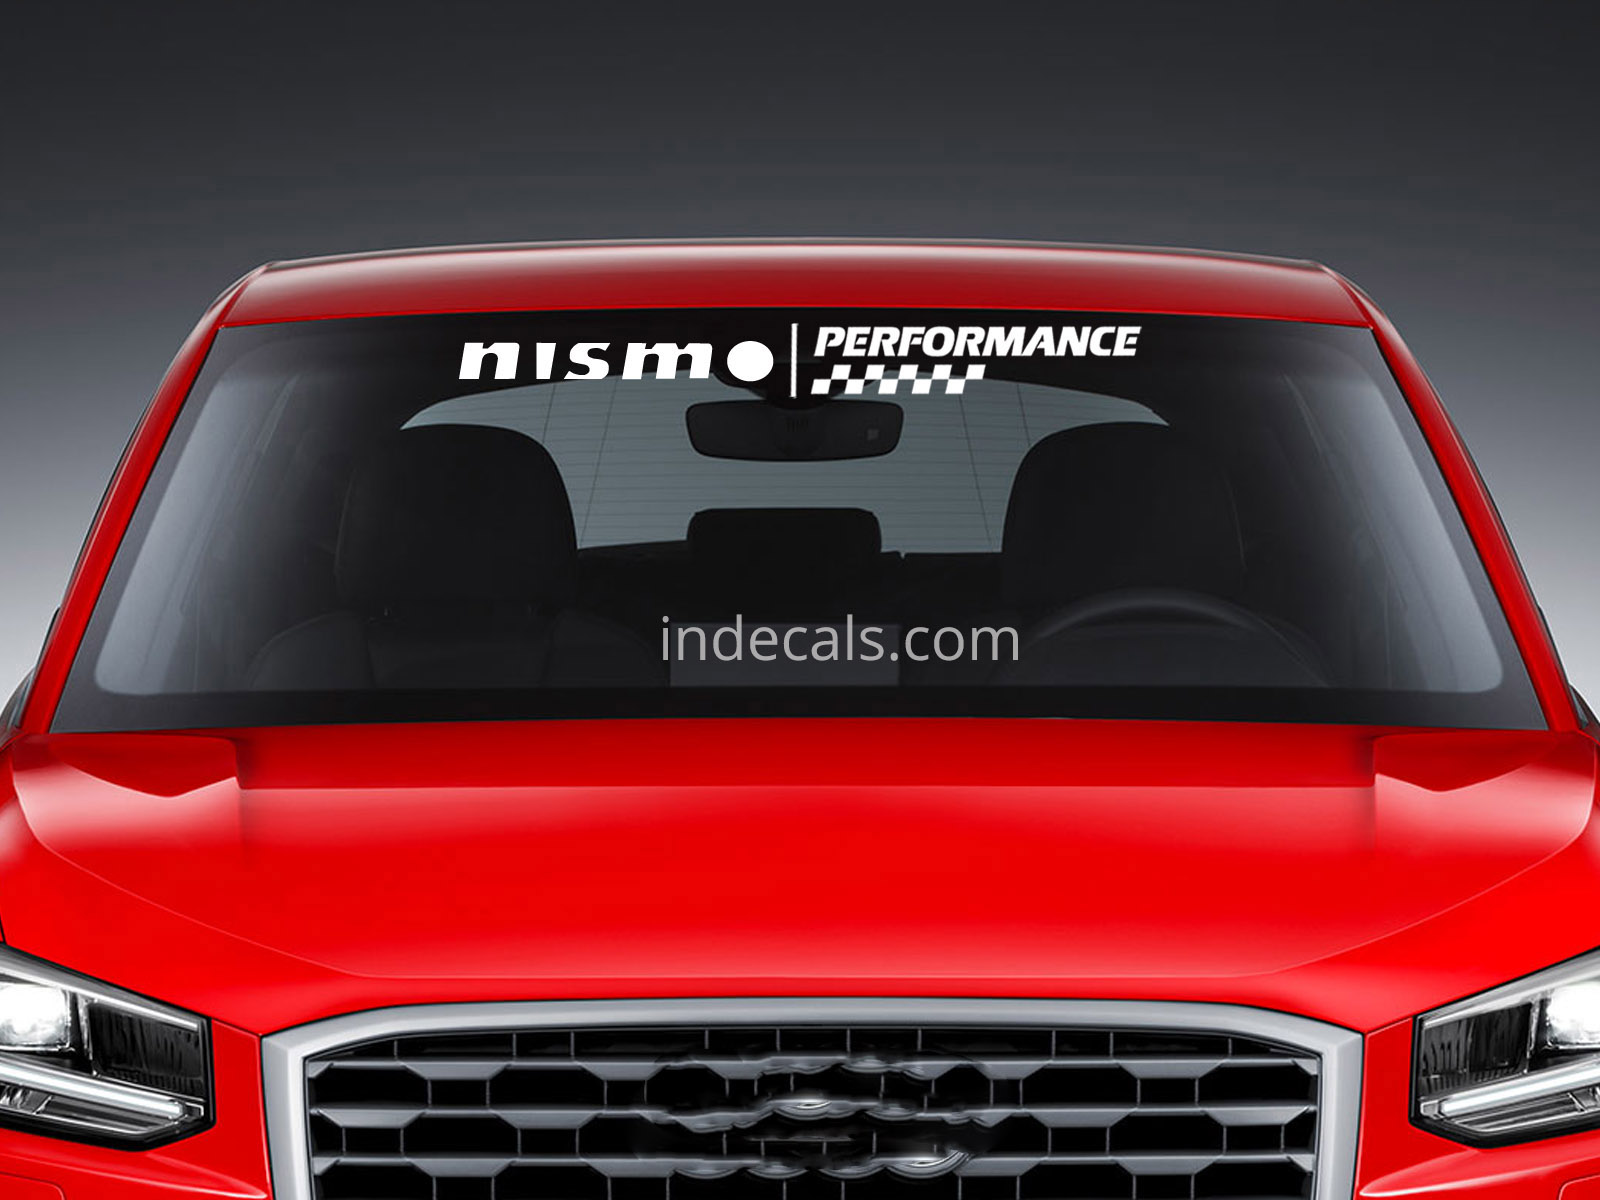 1 x Nismo Performance Sticker for Windshield or Back Window - White